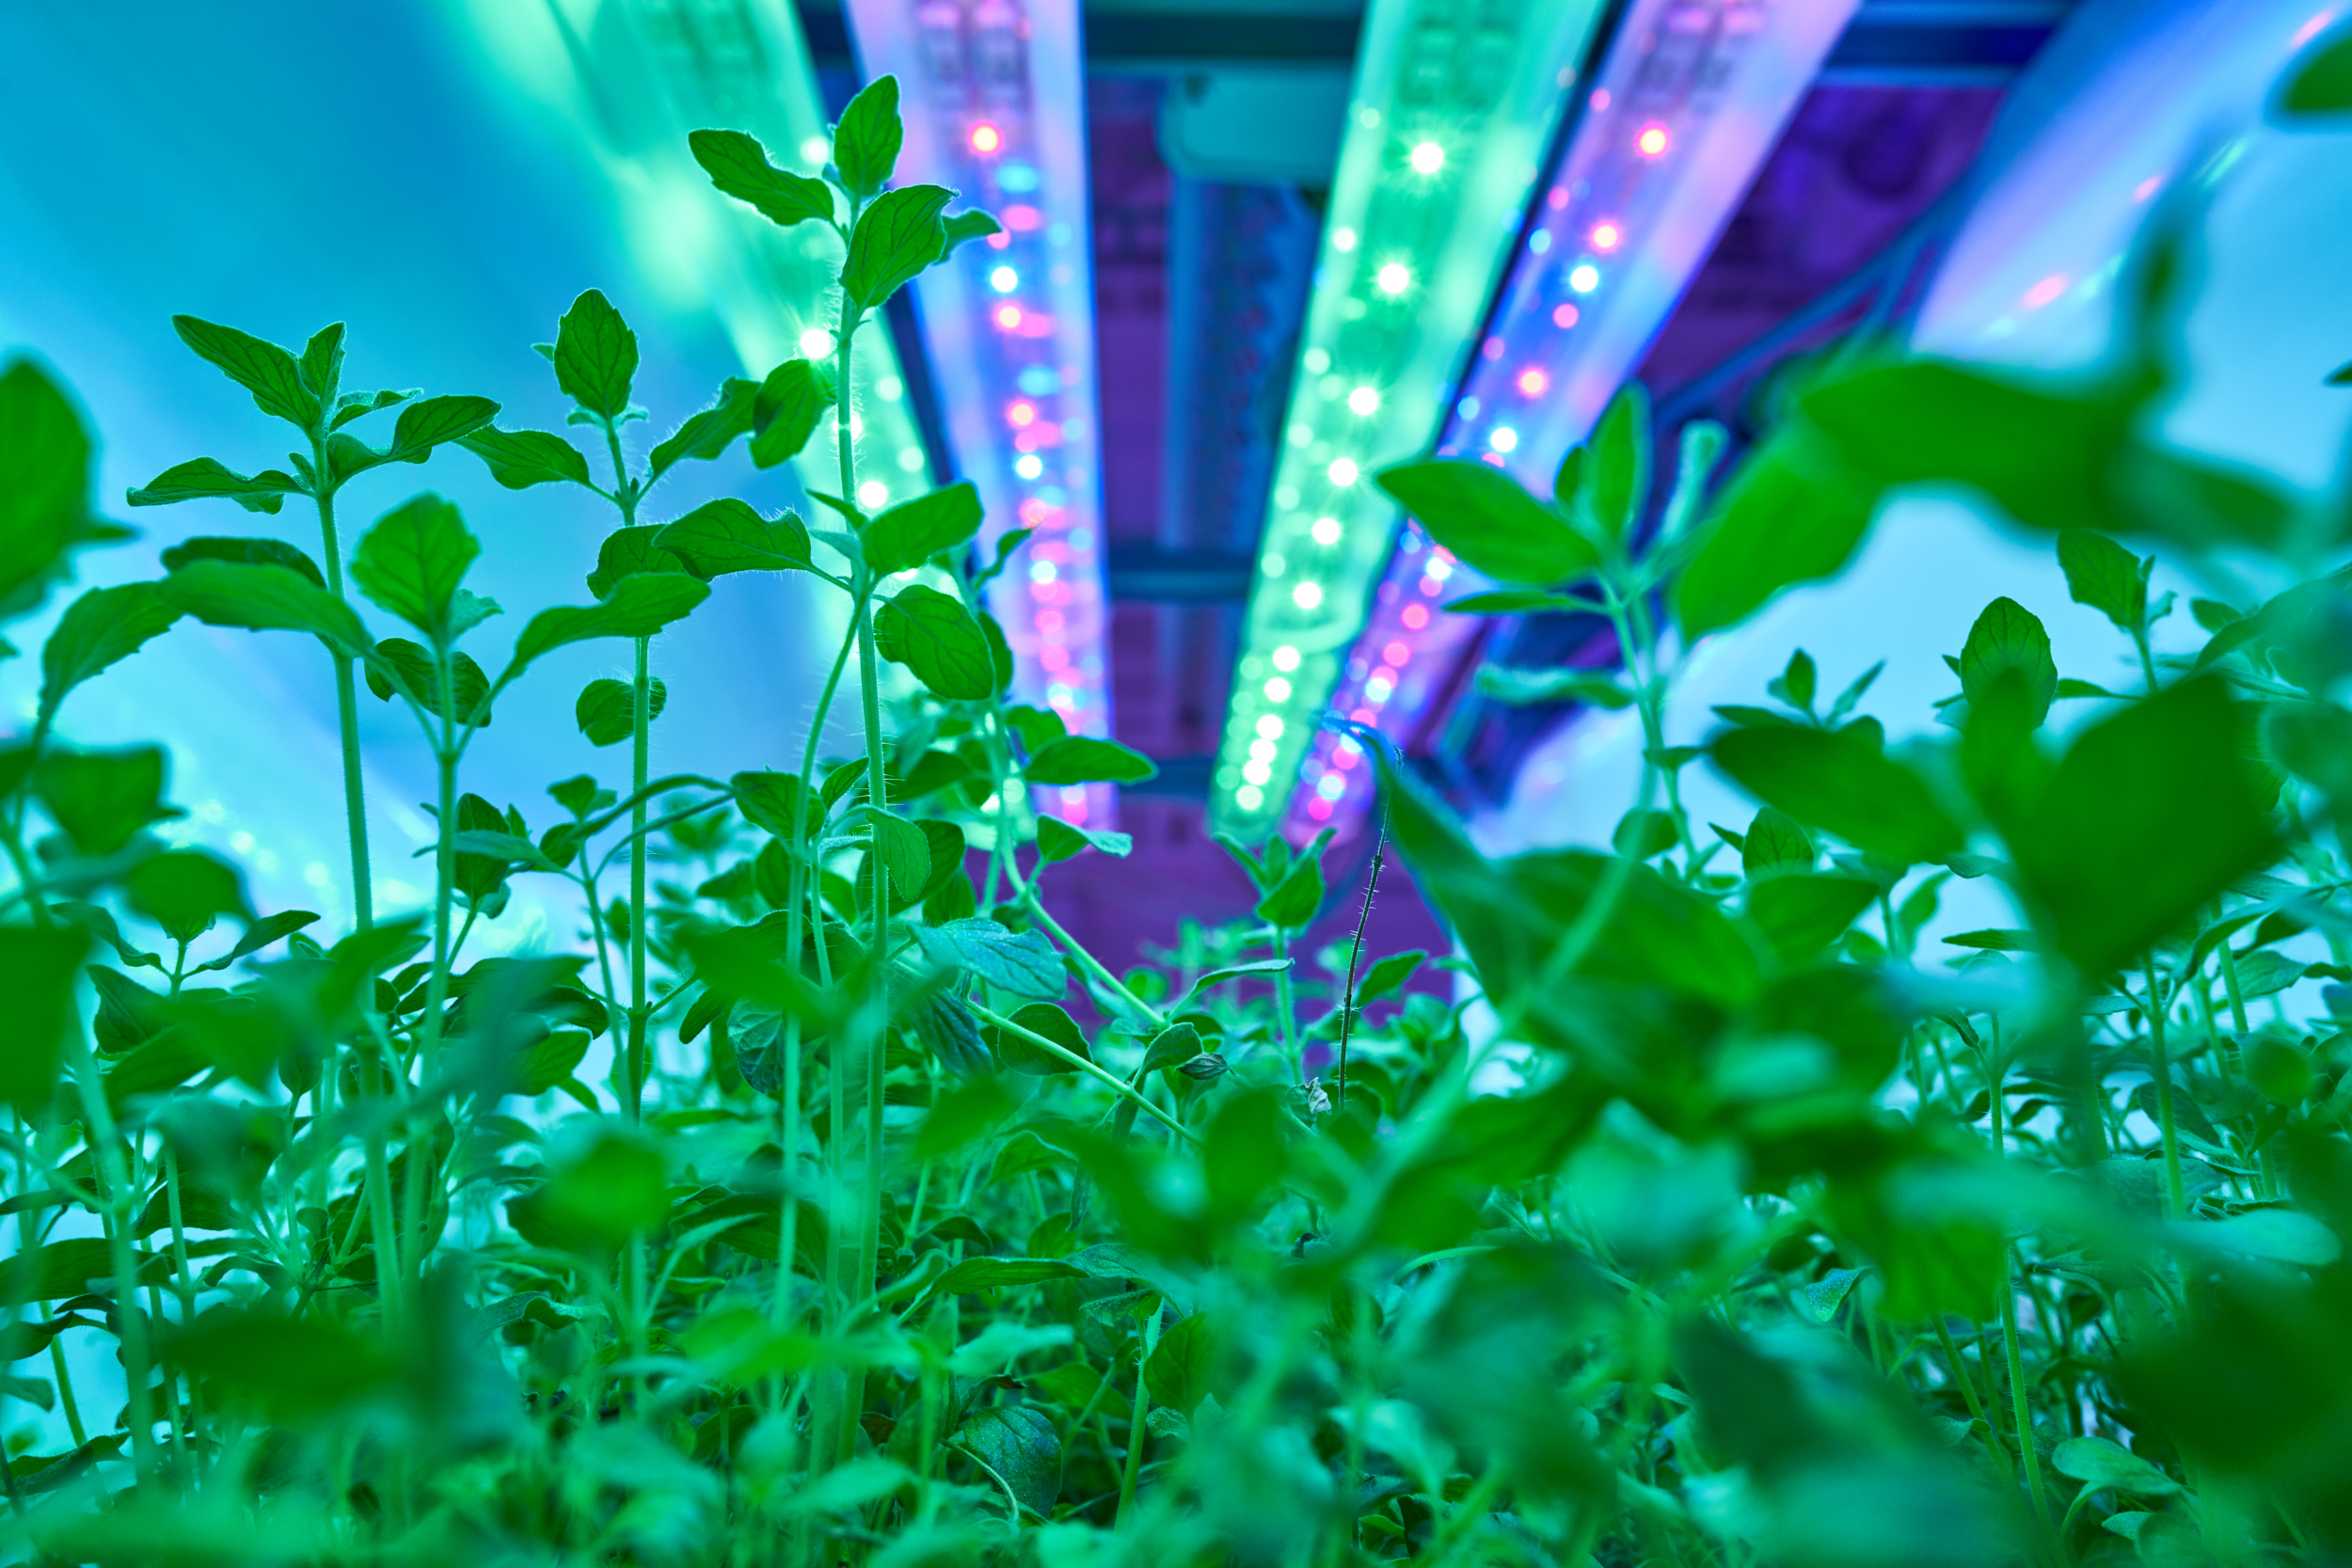 Plants with elongated lights in green and purple above them